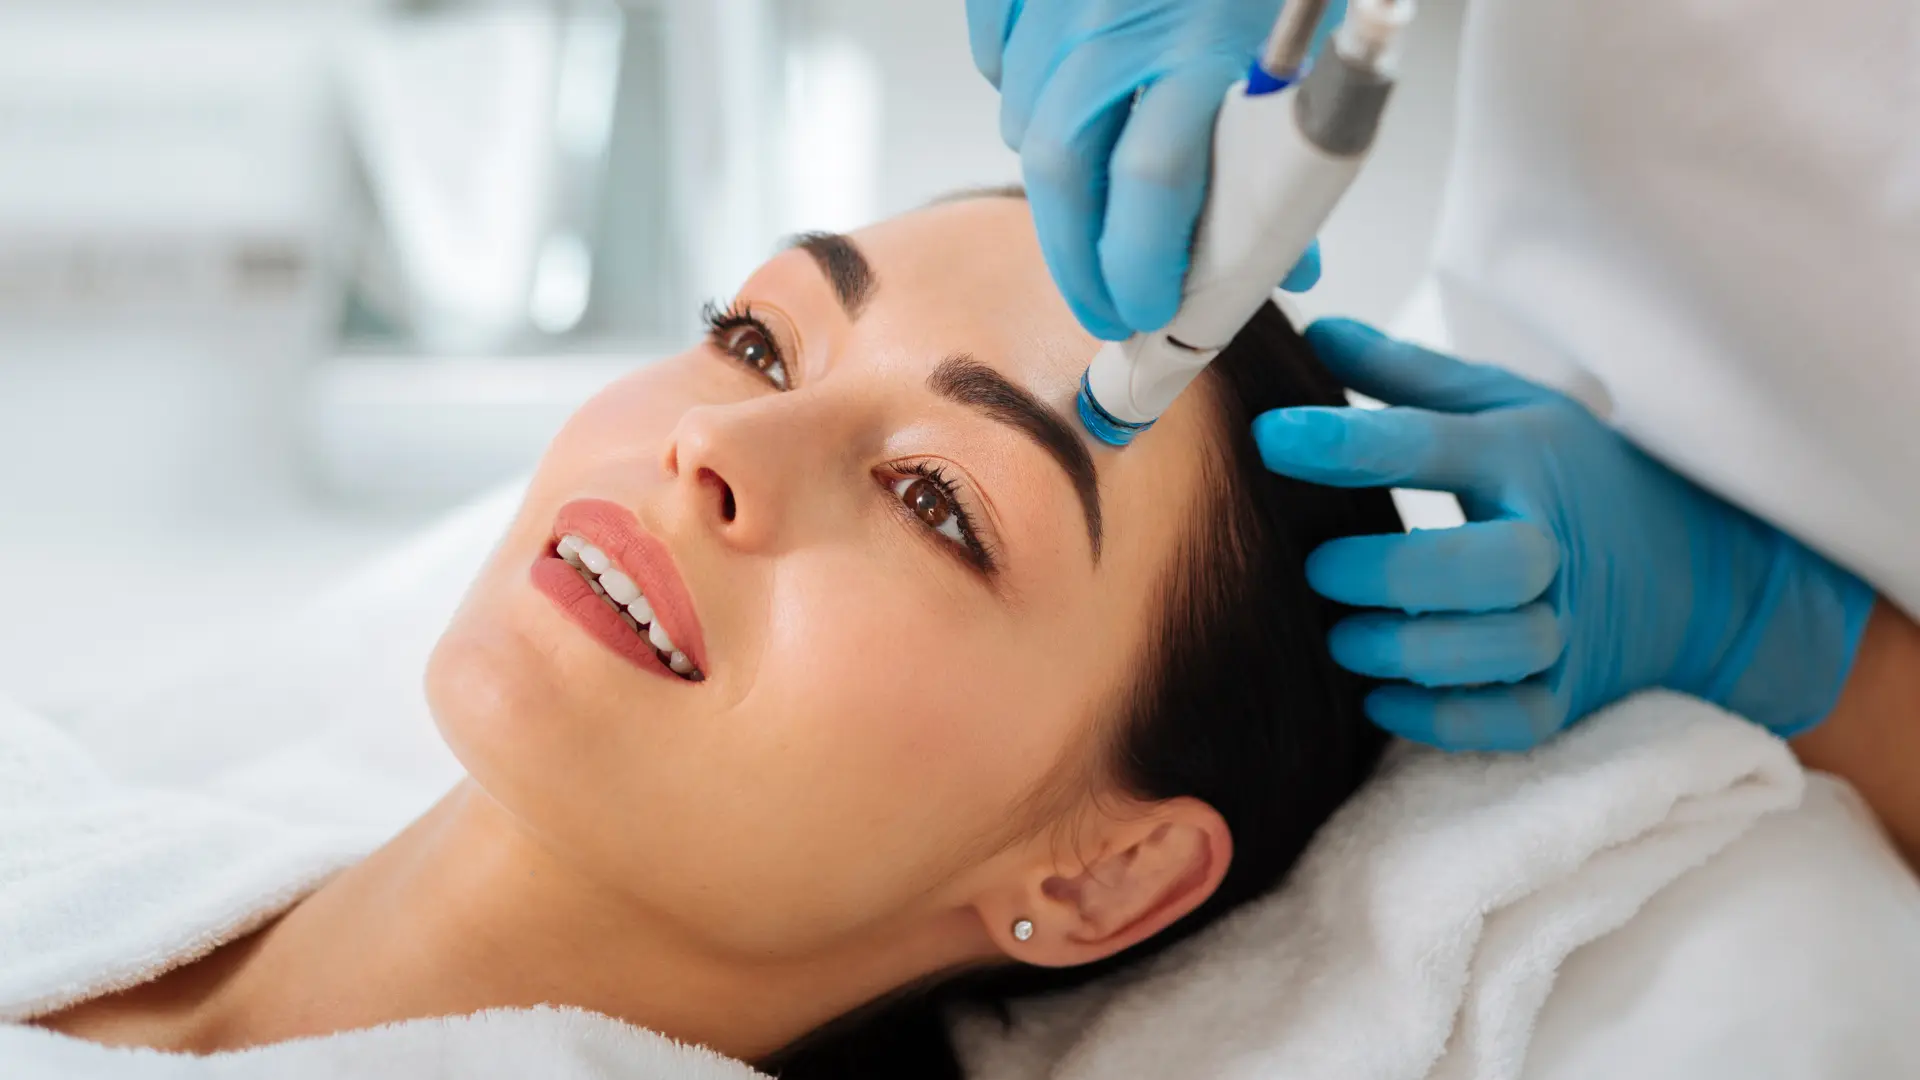 A close-up image of a HydraFacial booster serum being applied to a person's face during a spa treatment.